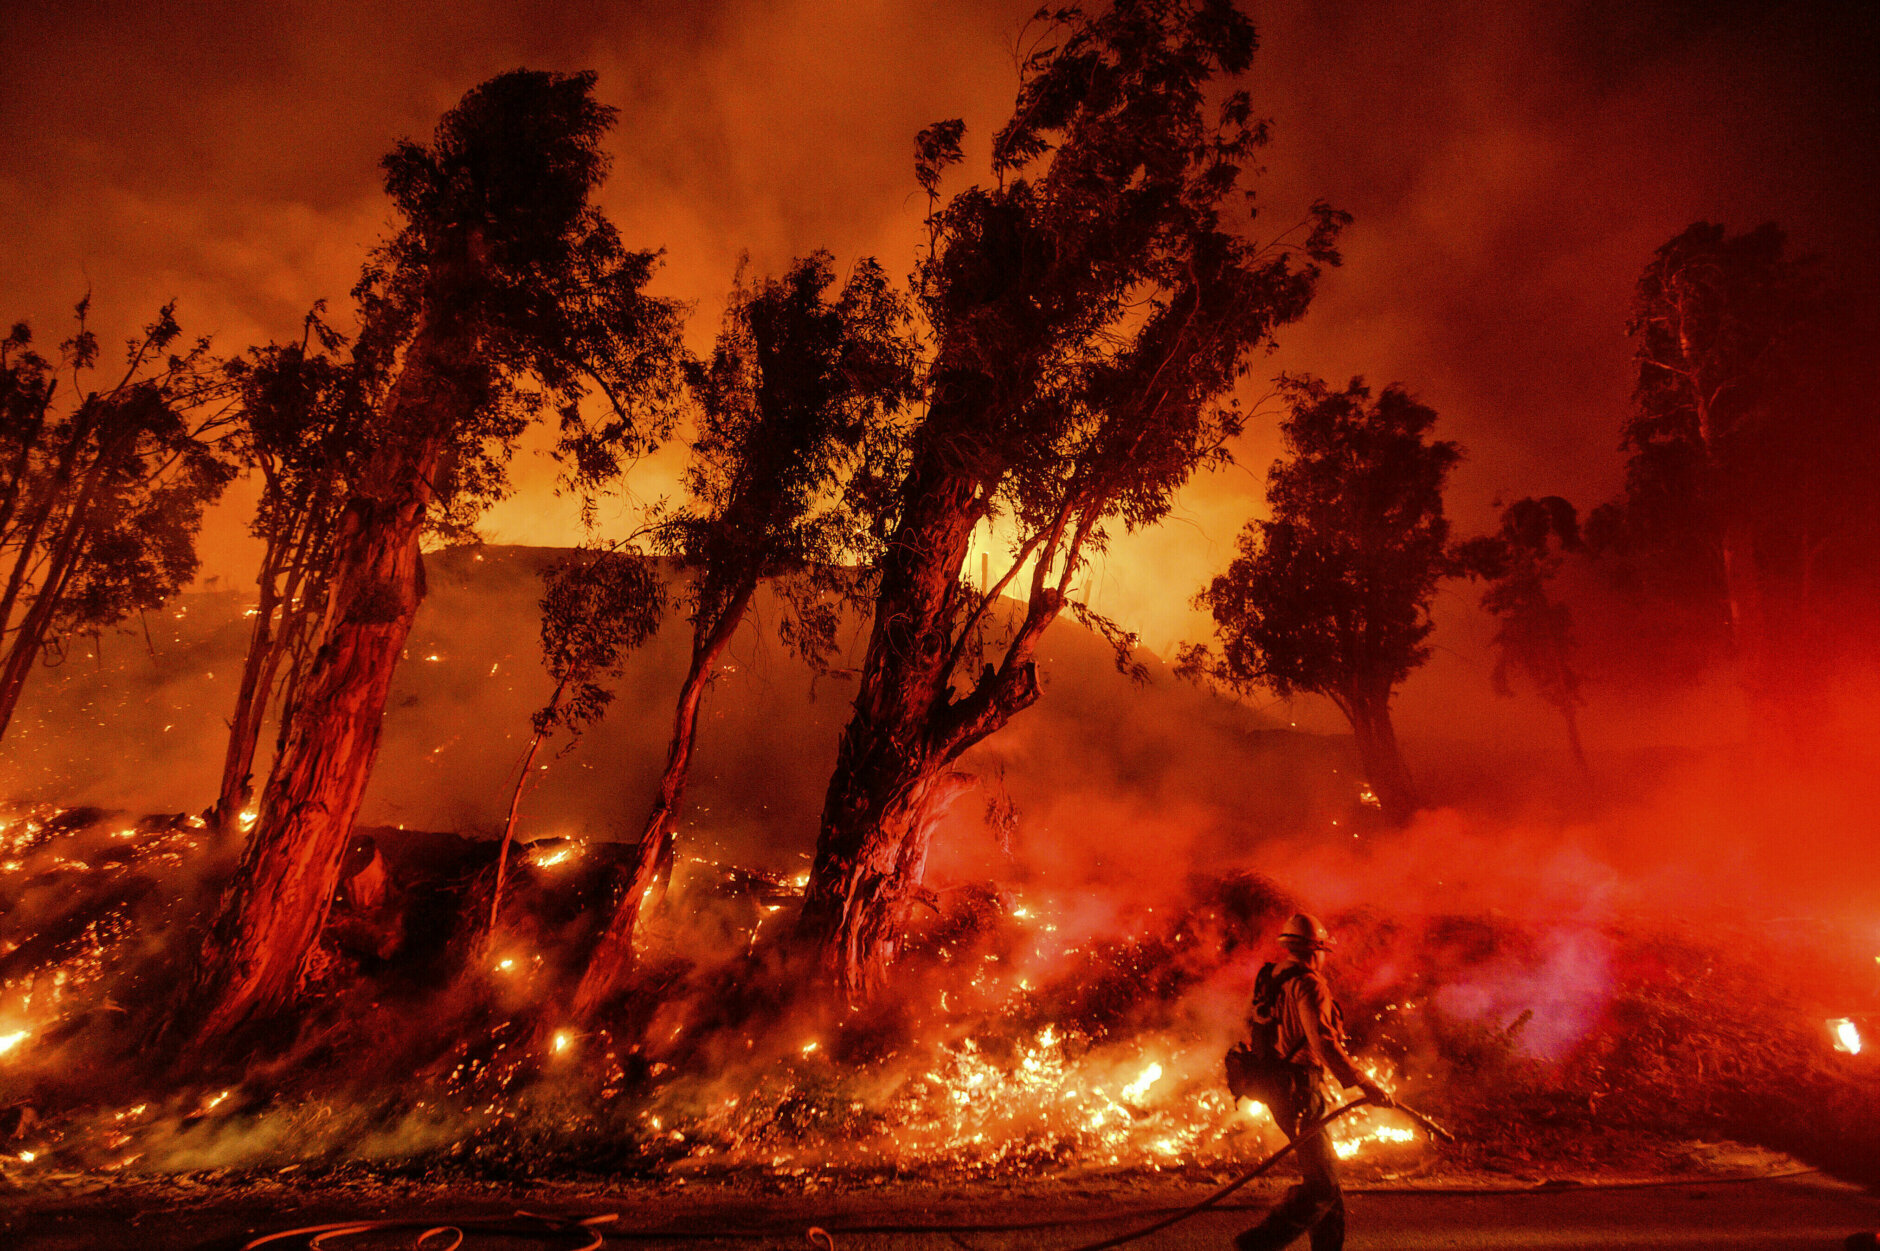 <p><em><strong>Strong winds fan explosive California wildfires as utilities cut power to millions</strong></em></p>
<p>It&#8217;s becoming a familiar scene for Californians: Images of firefighters dwarfed by flames taller than trees, beneath a blood-red sky pierced by planes coating entire neighborhoods with flame retardants. <a href="https://wtop.com/consumer-news/2019/11/rebirth-angst-and-the-new-normal-of-california-wildfires/" target="_blank" rel="noopener">Evacuations are becoming routine</a>.</p>
<p>Despite California power companies implementing blackouts to prevent power lines from sparking blazes, 2019 still proved to be one of the state&#8217;s most severe fire seasons on record. The Kincade Fire <a href="https://wtop.com/national/2019/10/californians-hit-with-2nd-round-of-sweeping-blackouts/" target="_blank" rel="noopener">burned for over a week in late October</a>, threatening more than 90,000 structures and becoming Sonoma County&#8217;s largest wildfire on record.</p>
<p>This year saw seasonal fire threats continue to worsen as climates grow hotter and drier across the globe. <a href="https://wtop.com/australia/2019/12/raging-wildfires-trap-4000-at-australian-towns-waterfront/" target="_blank" rel="noopener">Just ask Australia</a>, where one of the year&#8217;s gravest climate catastrophes will continue to unfold into the new year.</p>
